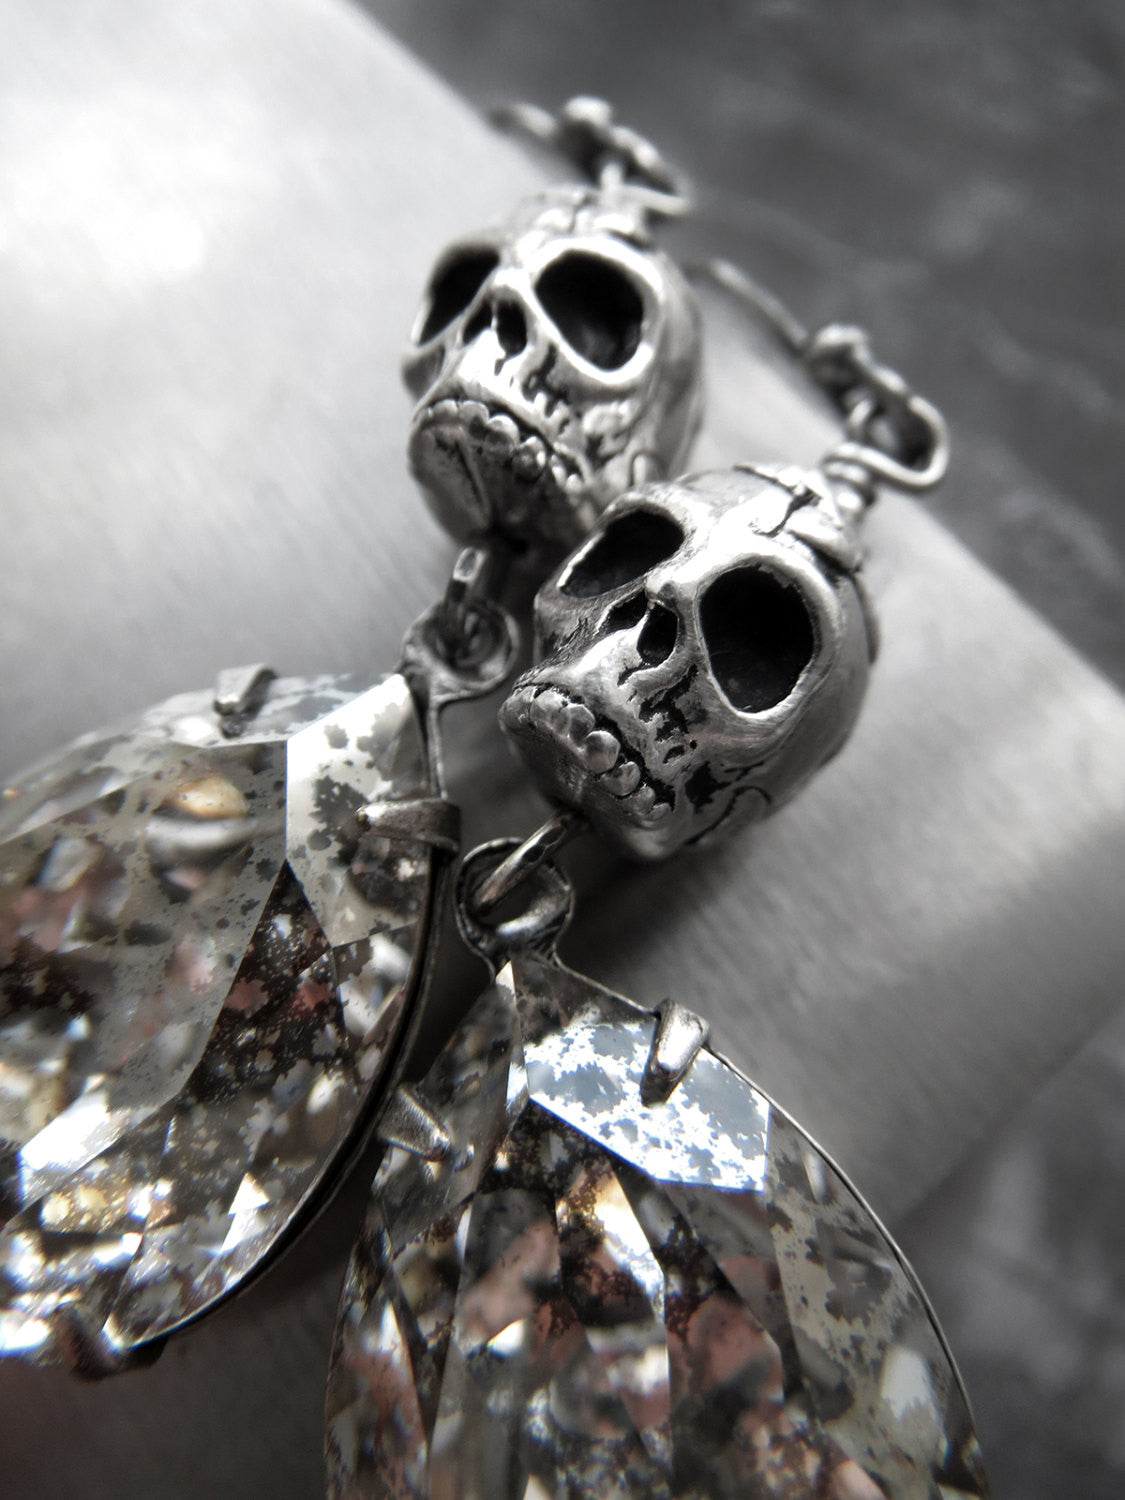 Gothic Silver Skull Earrings with Patina Crystal Teardrops